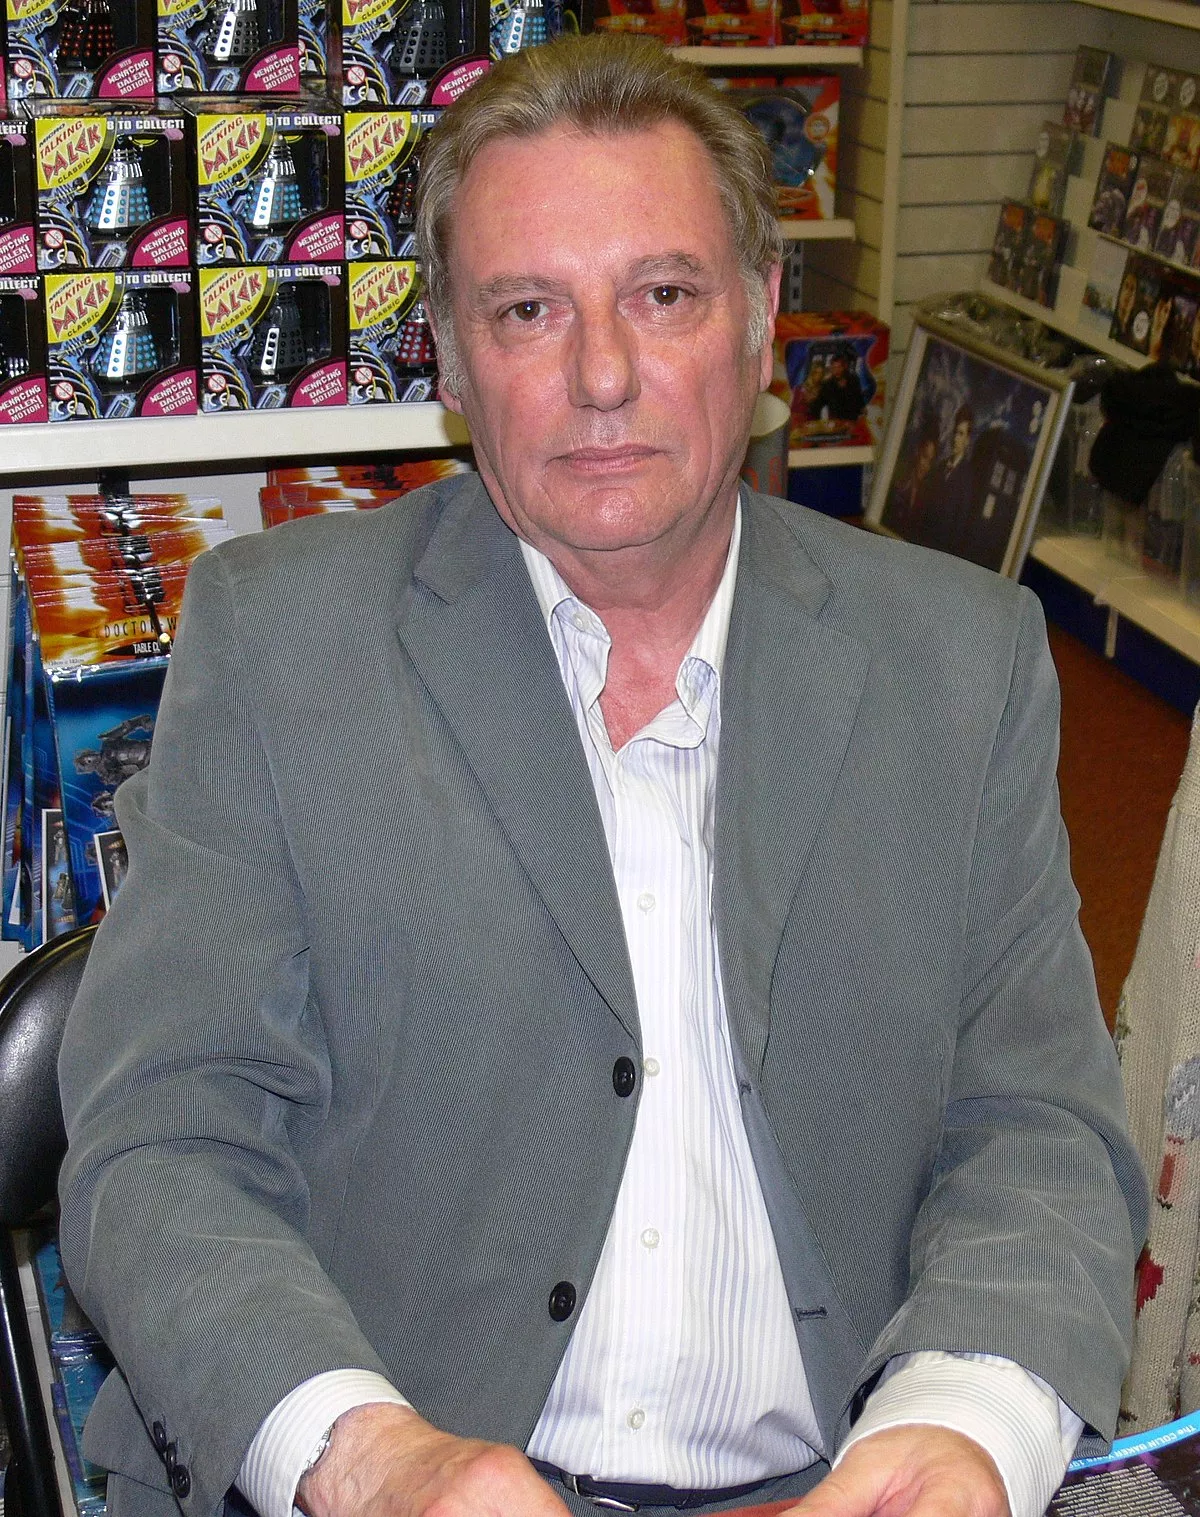 20 Facts About Paul Darrow | FactSnippet